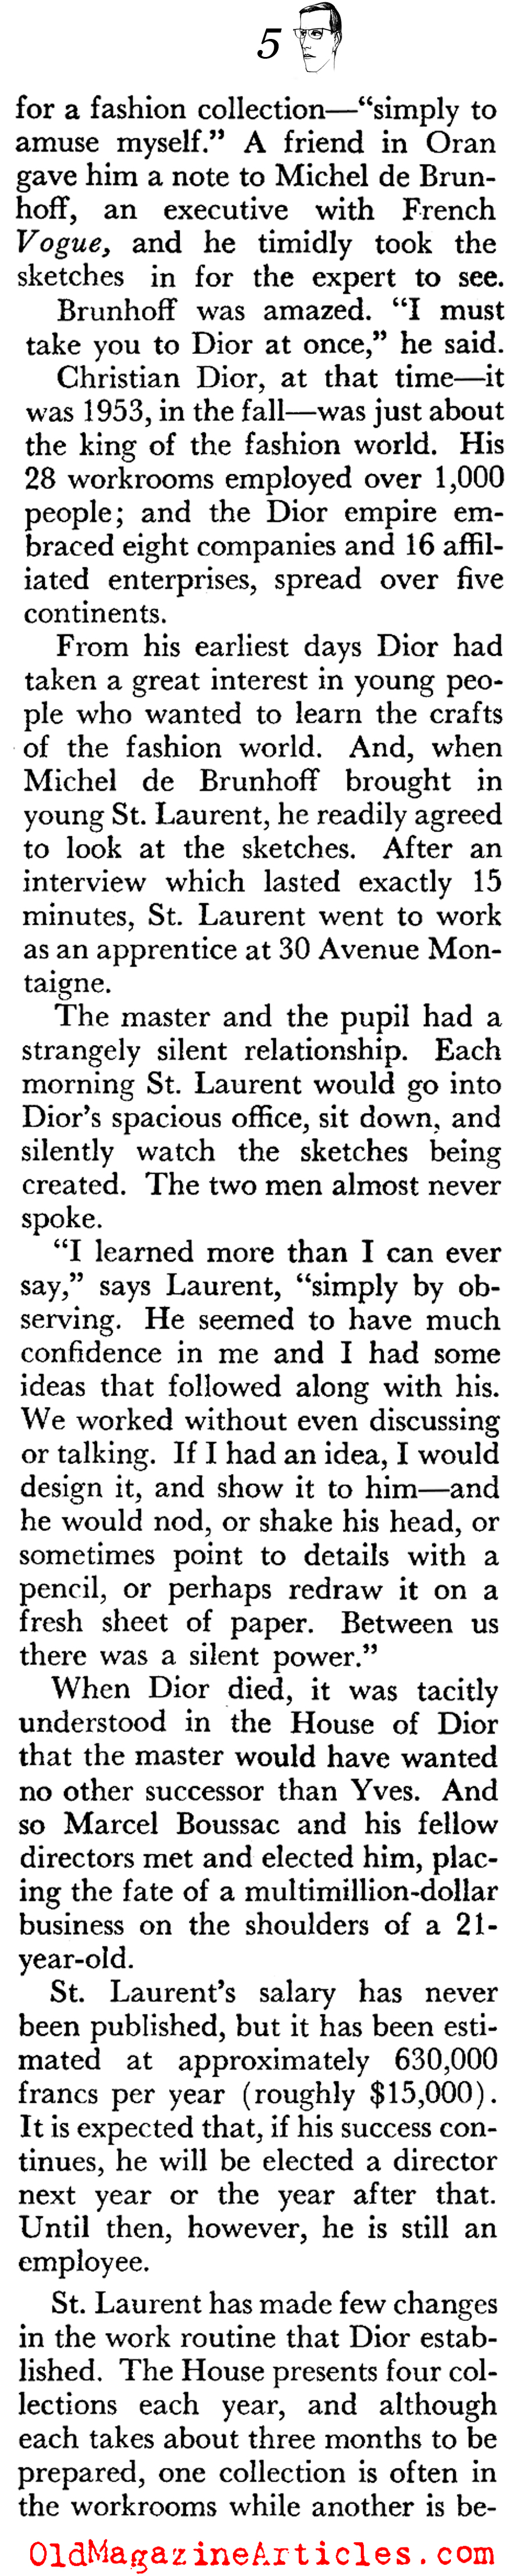 Yves Saint Laurent Takes Over the House of Dior (Coronet Magazine, 1958)